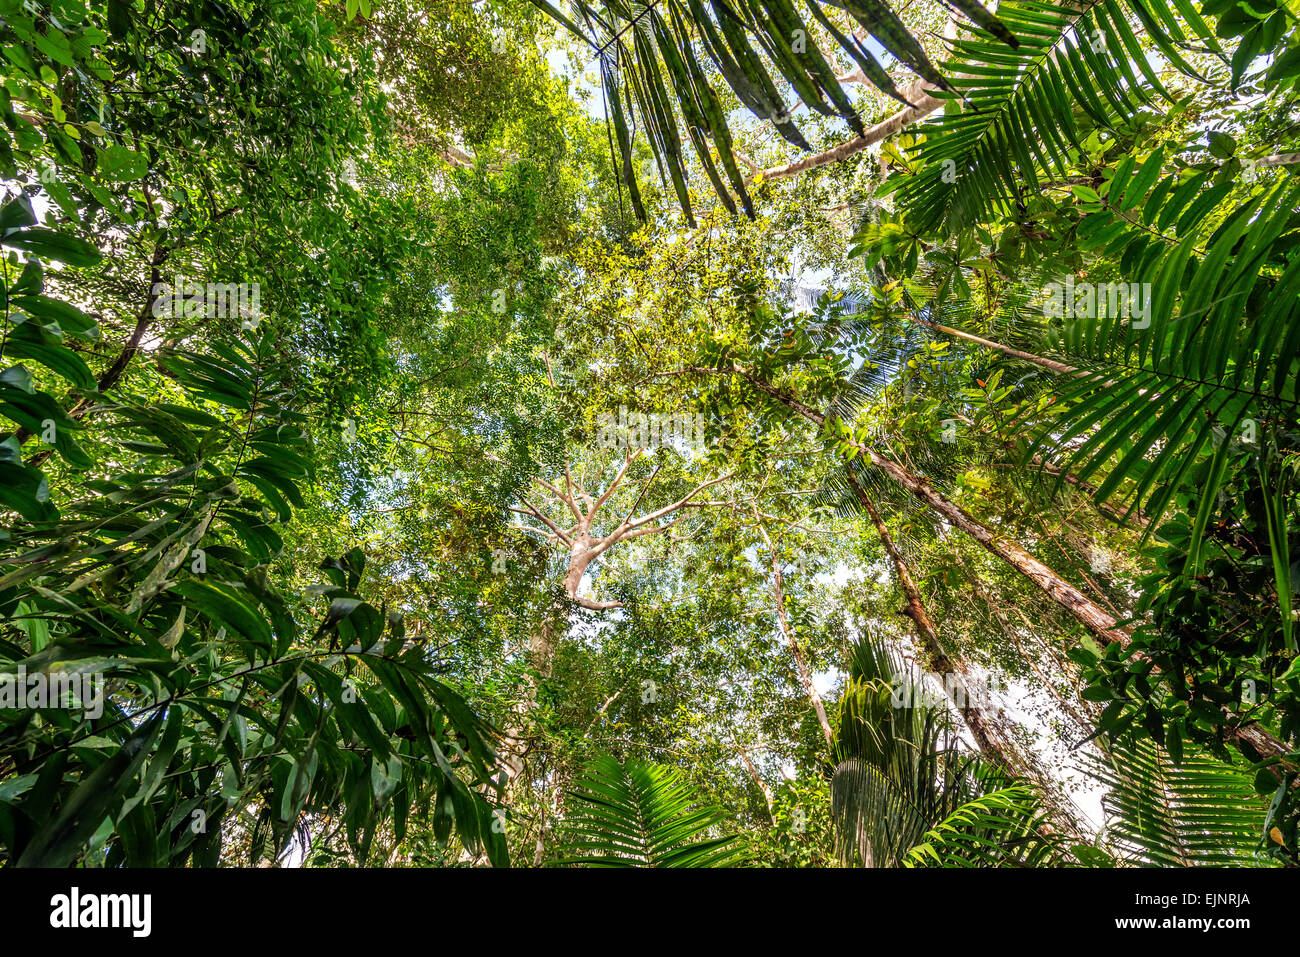 View of the thick lush green canopy of the Amazon rainforest near Iquitos, Peru Stock Photo